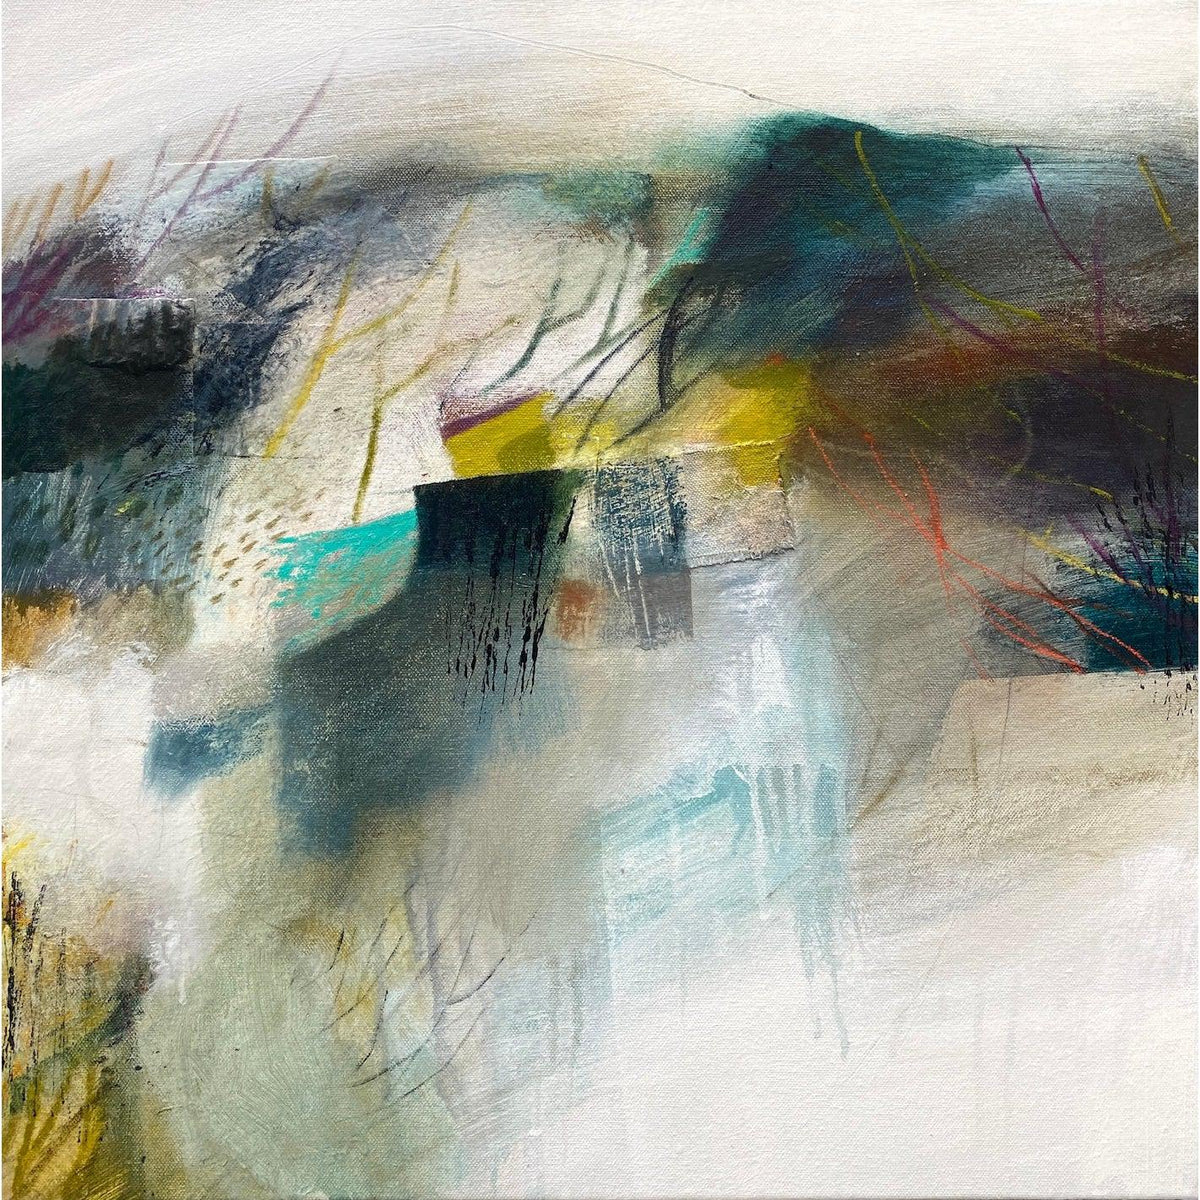 Highland 1, mixed media by Karen Birchwood, available from Padstow Gallery, Cornwall